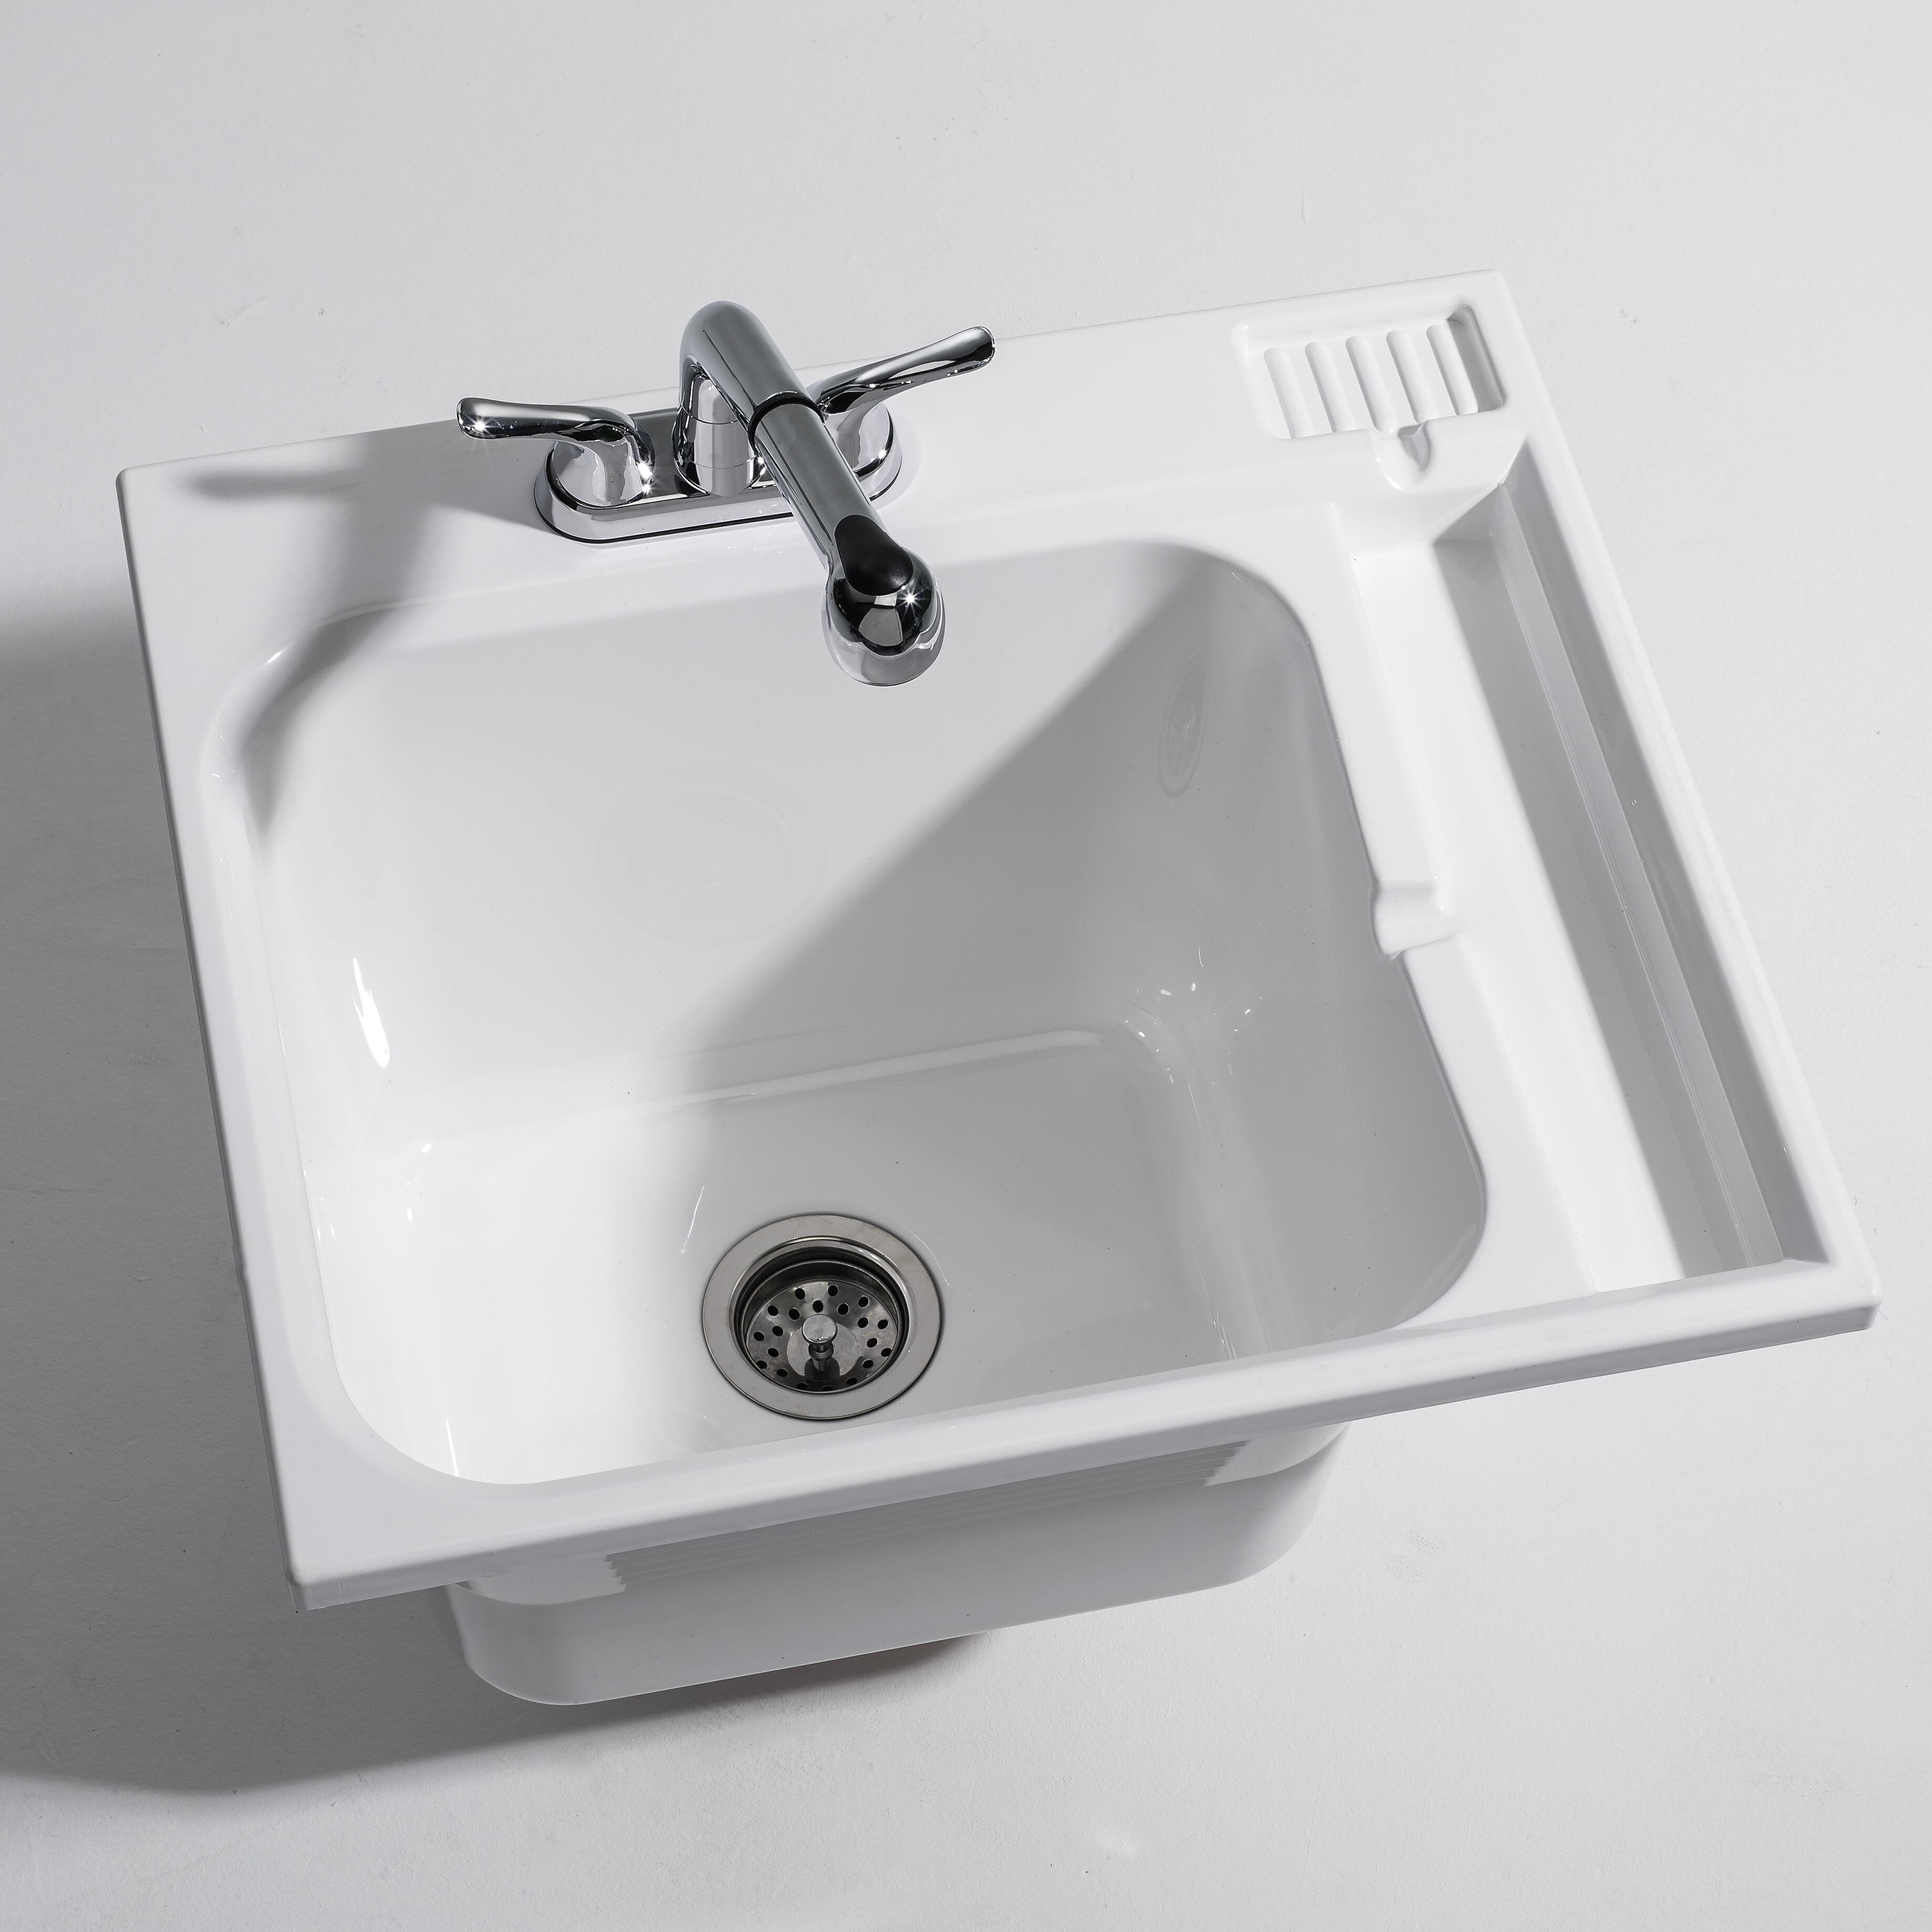 Cashel 25 X 22 Drop In Laundry Sink With Faucet Reviews